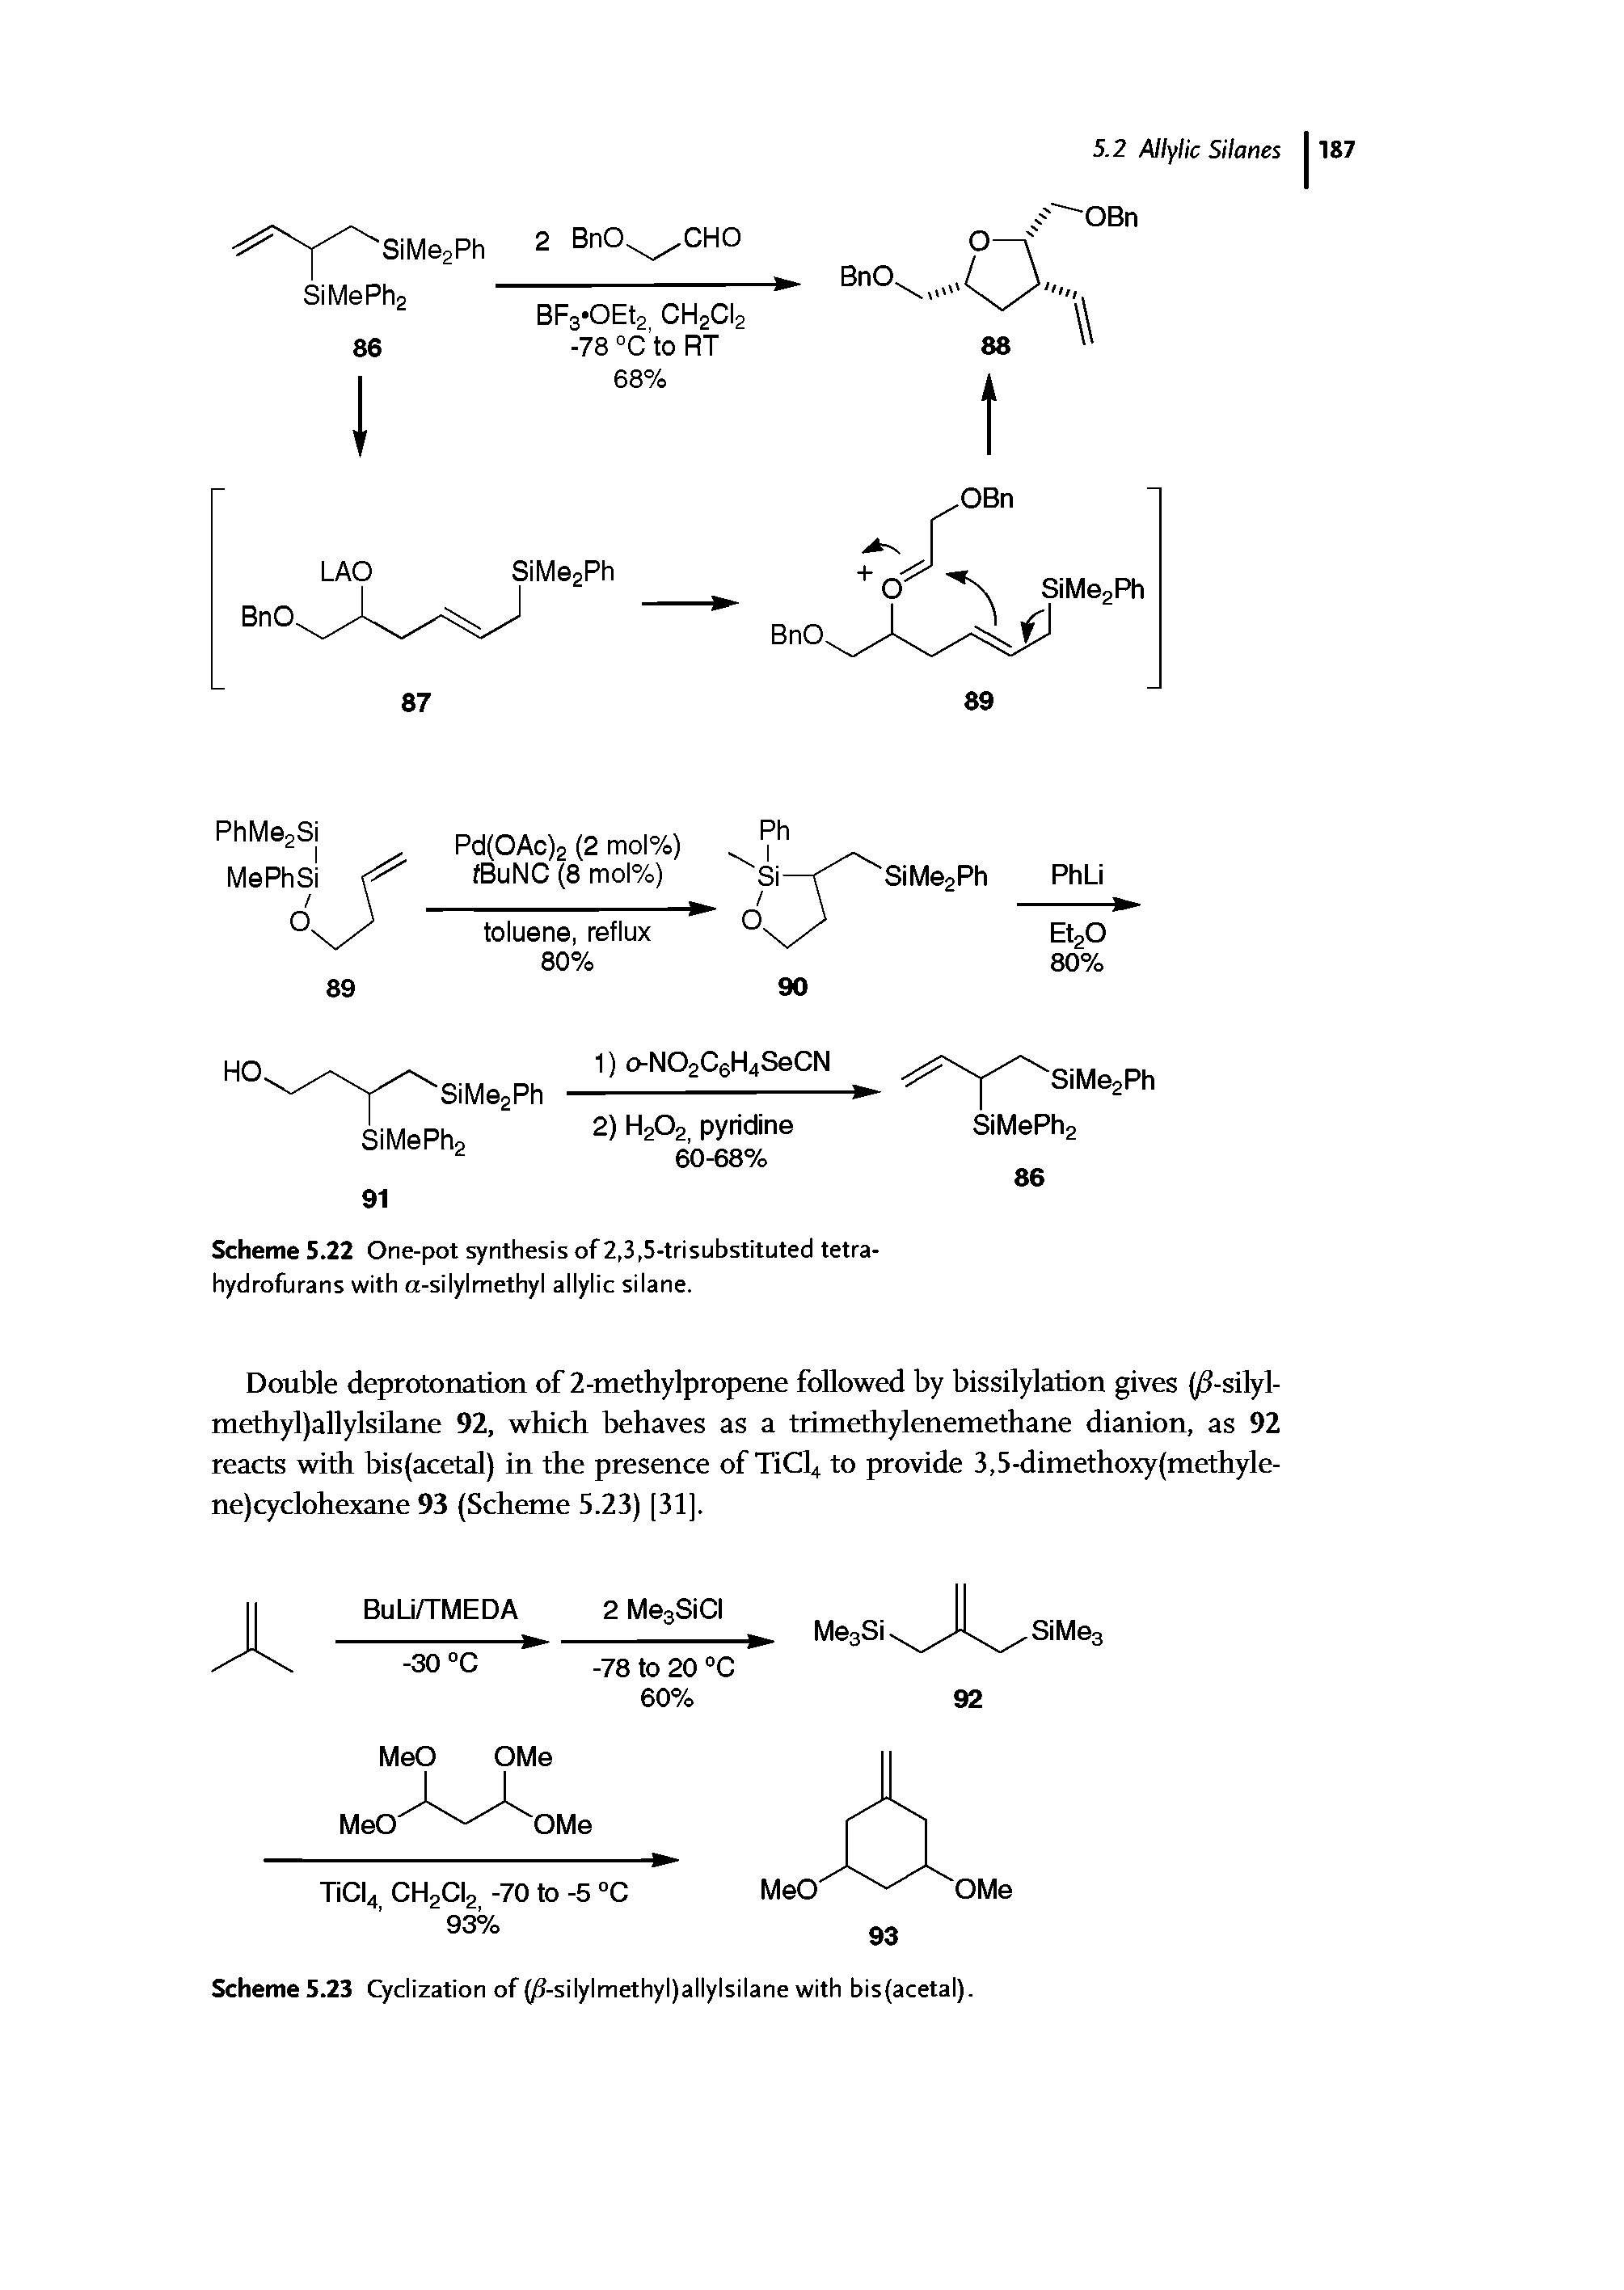 Scheme 5.22 One-pot synthesis of 2,3,5-trisubstituted tetra-hydrofurans with a-silylmethyl allylic silane.